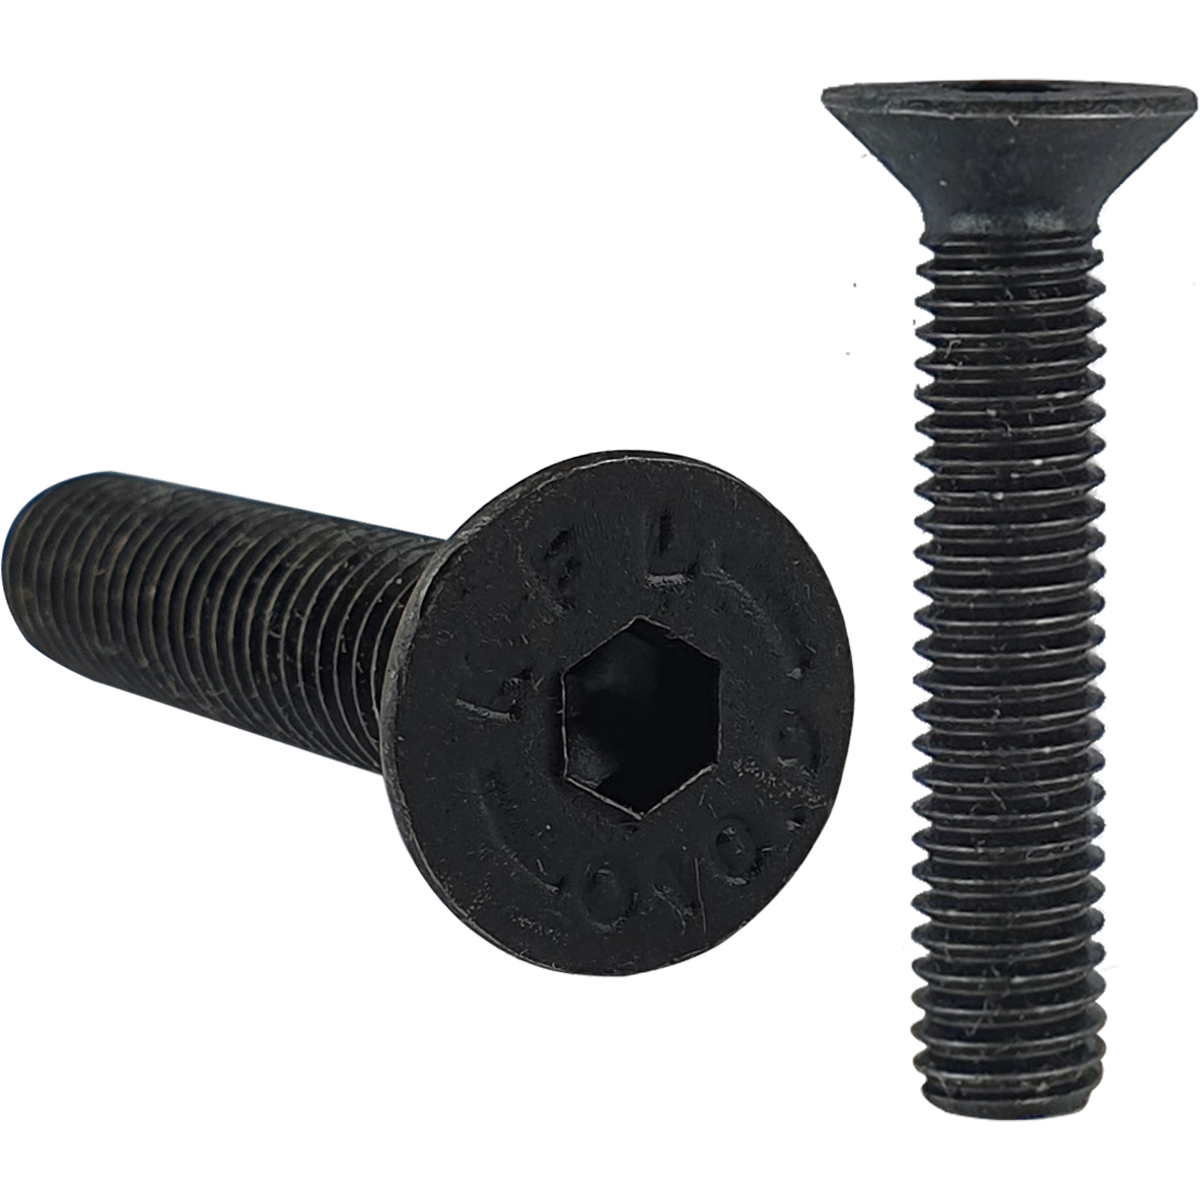 UNC - countersunk machine screws with a hex socket recess. A screw with a counter sunk head allowing for a flush finish to the material.